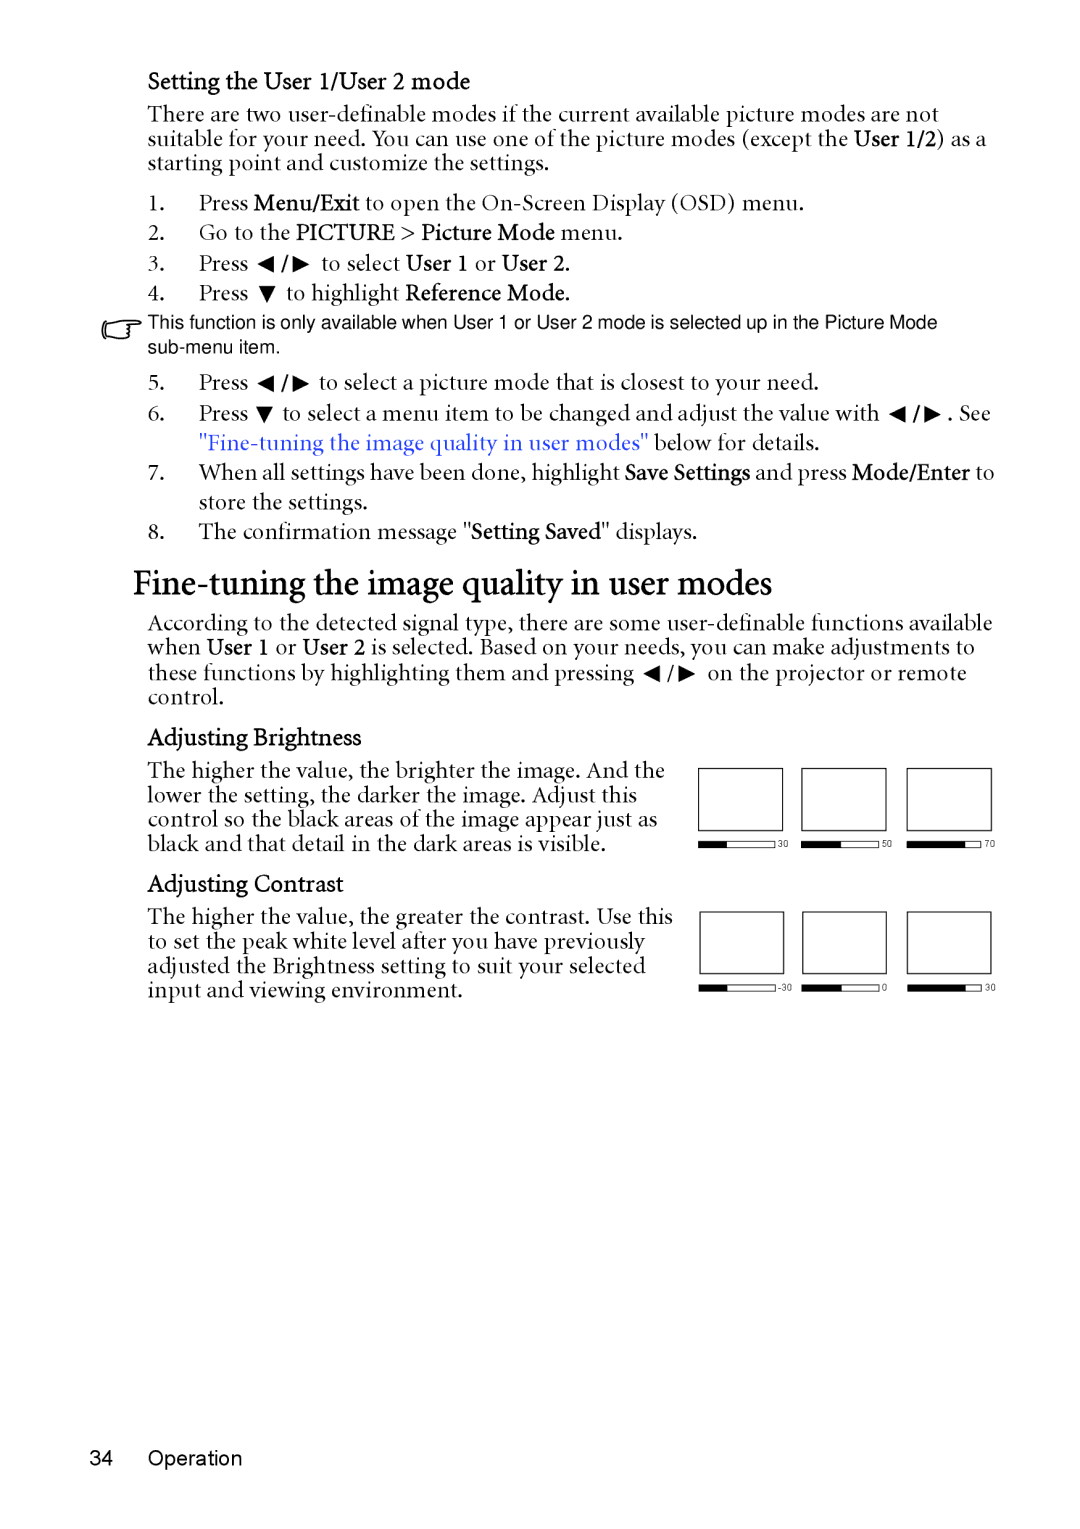 BenQ MP525 ST, MP515 ST Fine-tuning the image quality in user modes, Setting the User 1/User 2 mode, Adjusting Brightness 